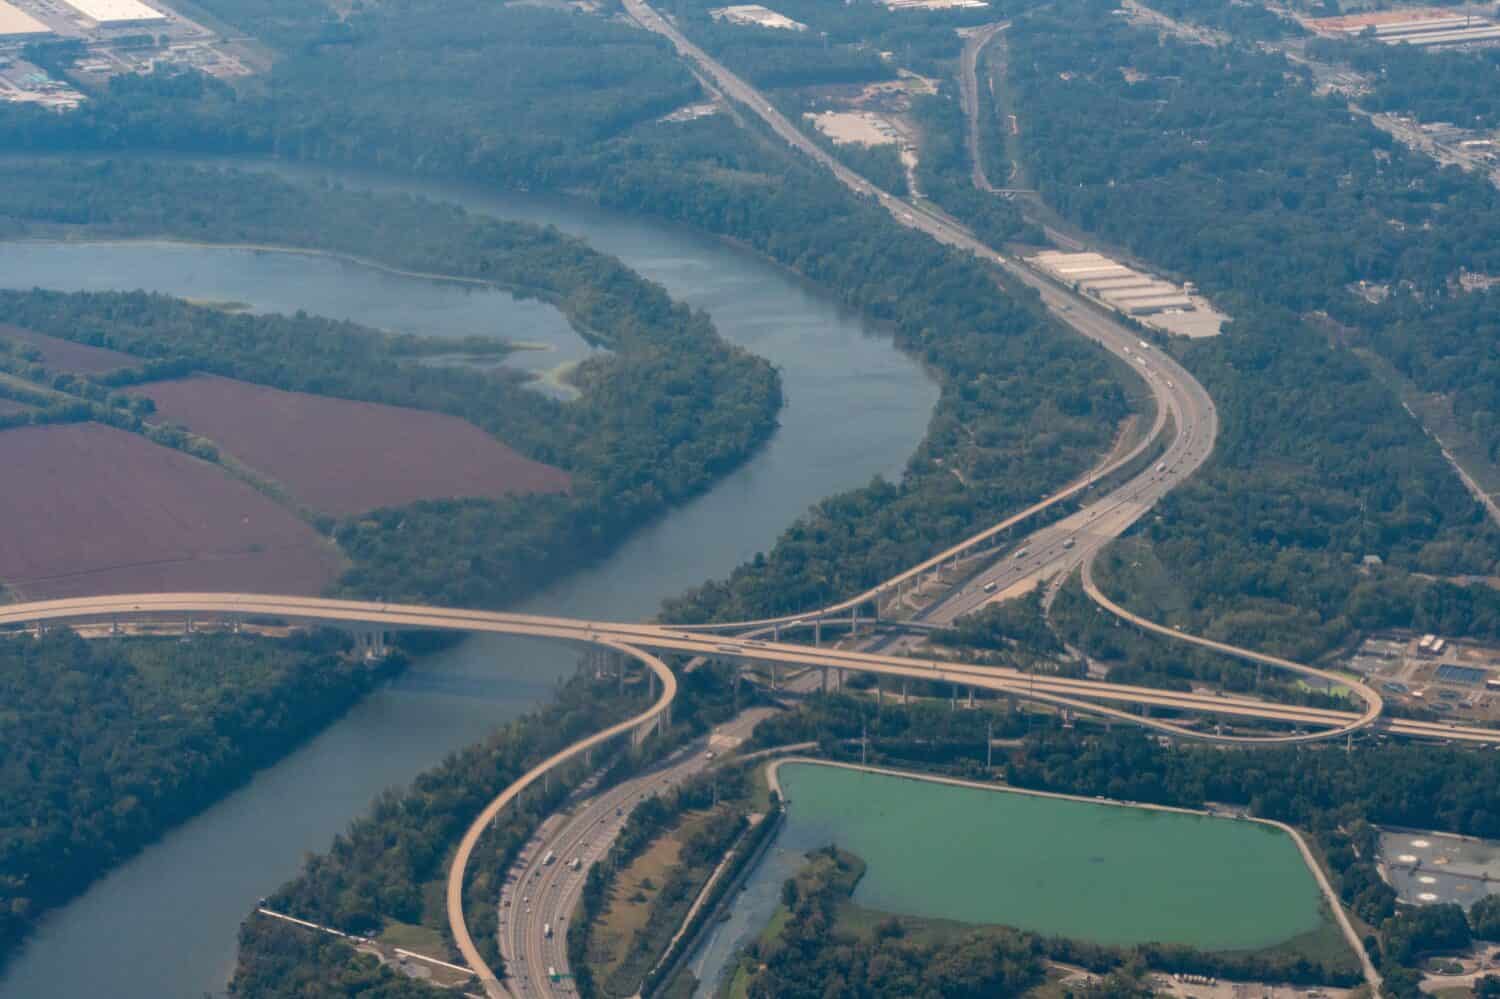 Richmond, Virginia, USA - Aerial view of the James River, I-95 and the Vietnam Veterans Bridge on Pocahontas Parkway I-895 in Chesterfield County south of Richmond.